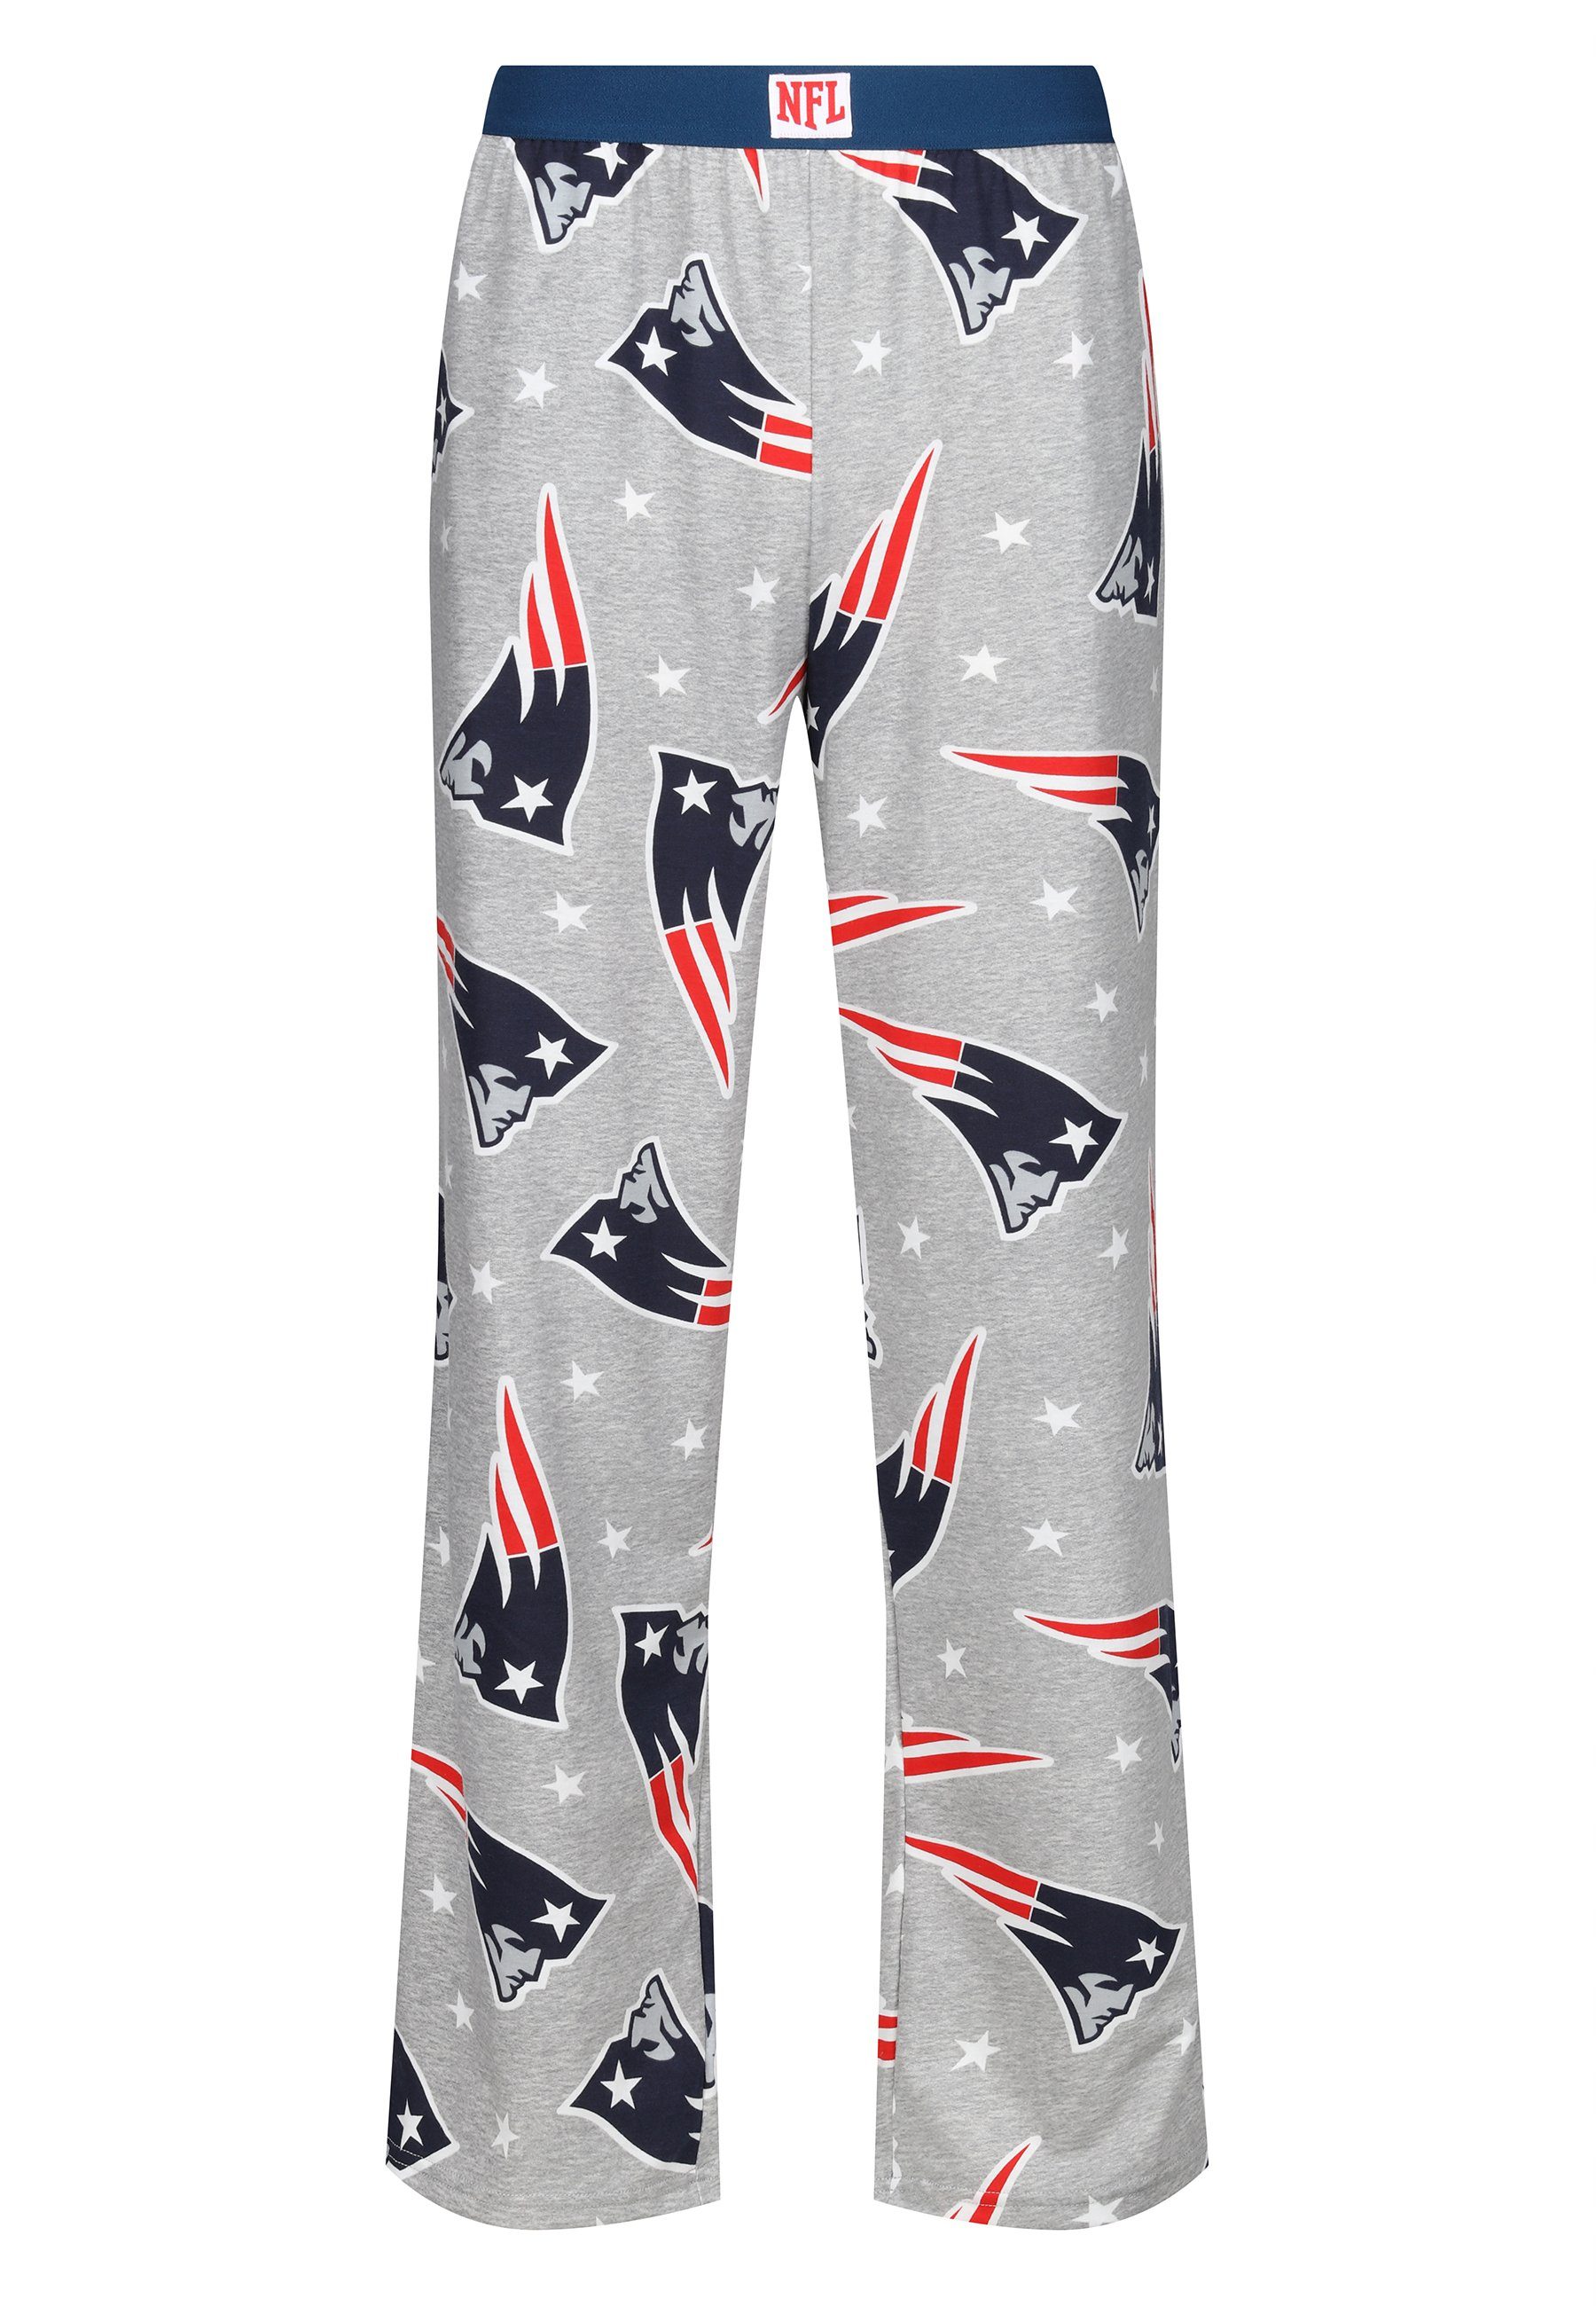 Recovered Loungepants Loungepants Marl NFL England Patriots New and Stars Logo Grey